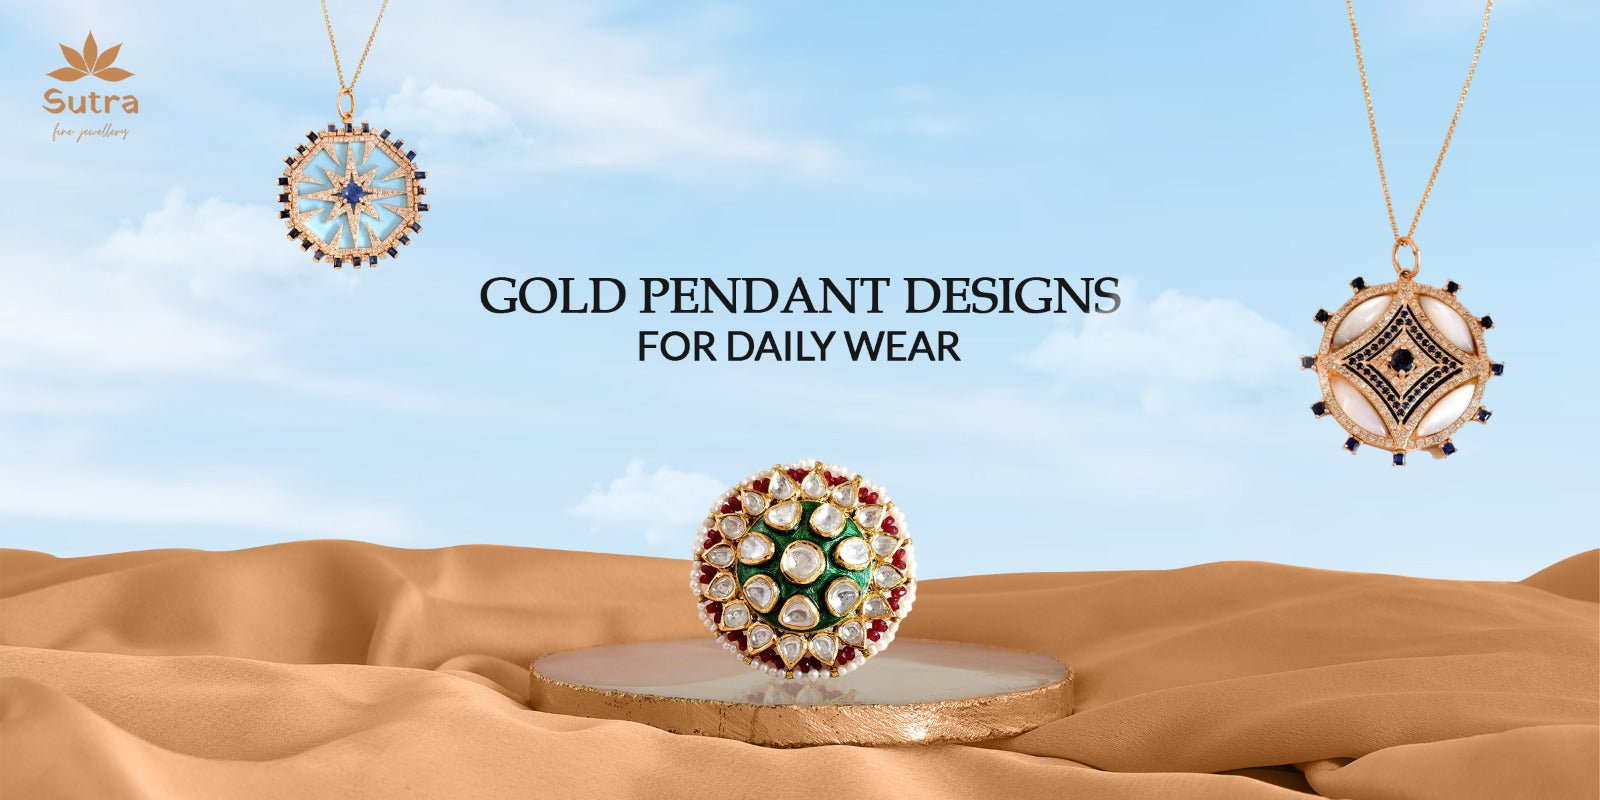 Gold Pendant Designs for Daily Wear: A Must Add To Everyday Wardrobe